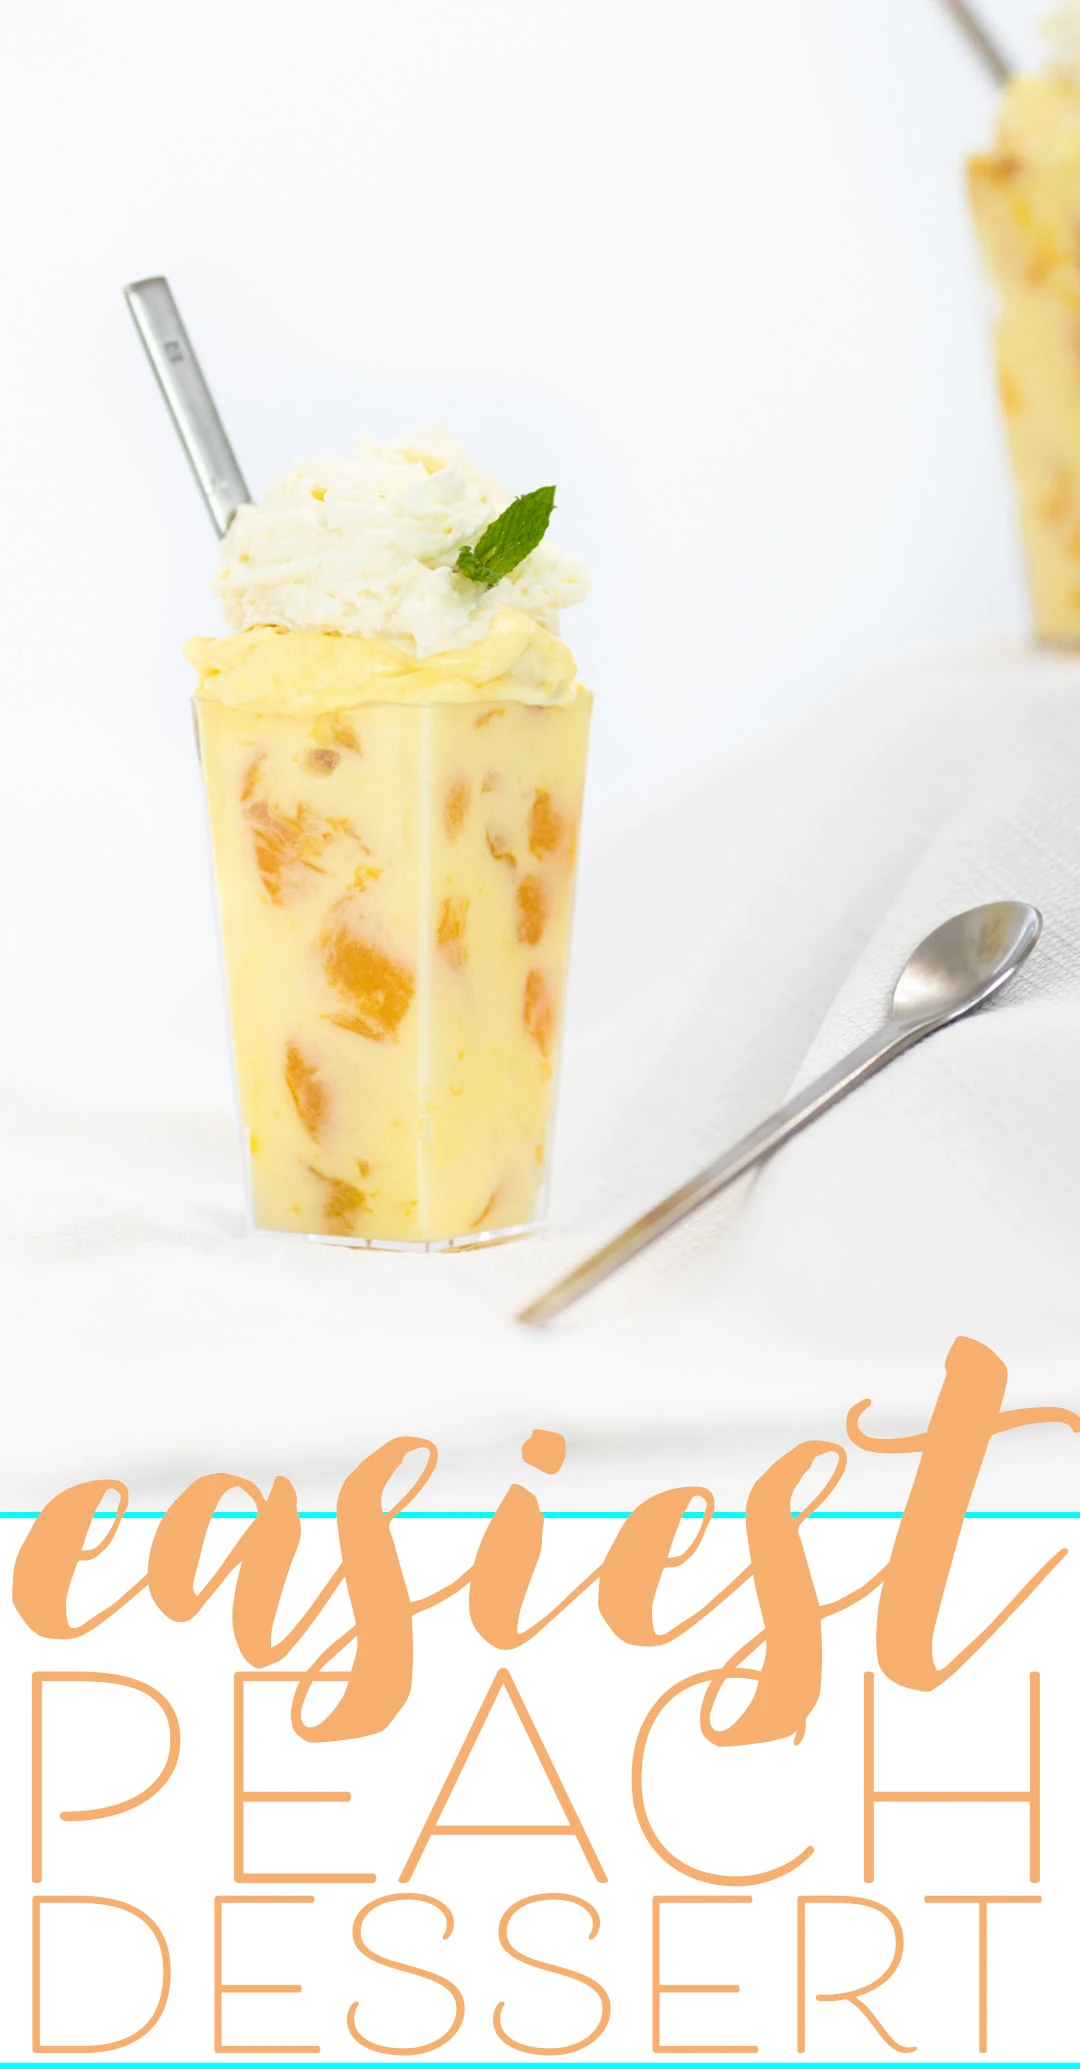 Peach Dessert with only 3 easy ingredients. Made in minutes, ready in an hour. Oh yum.